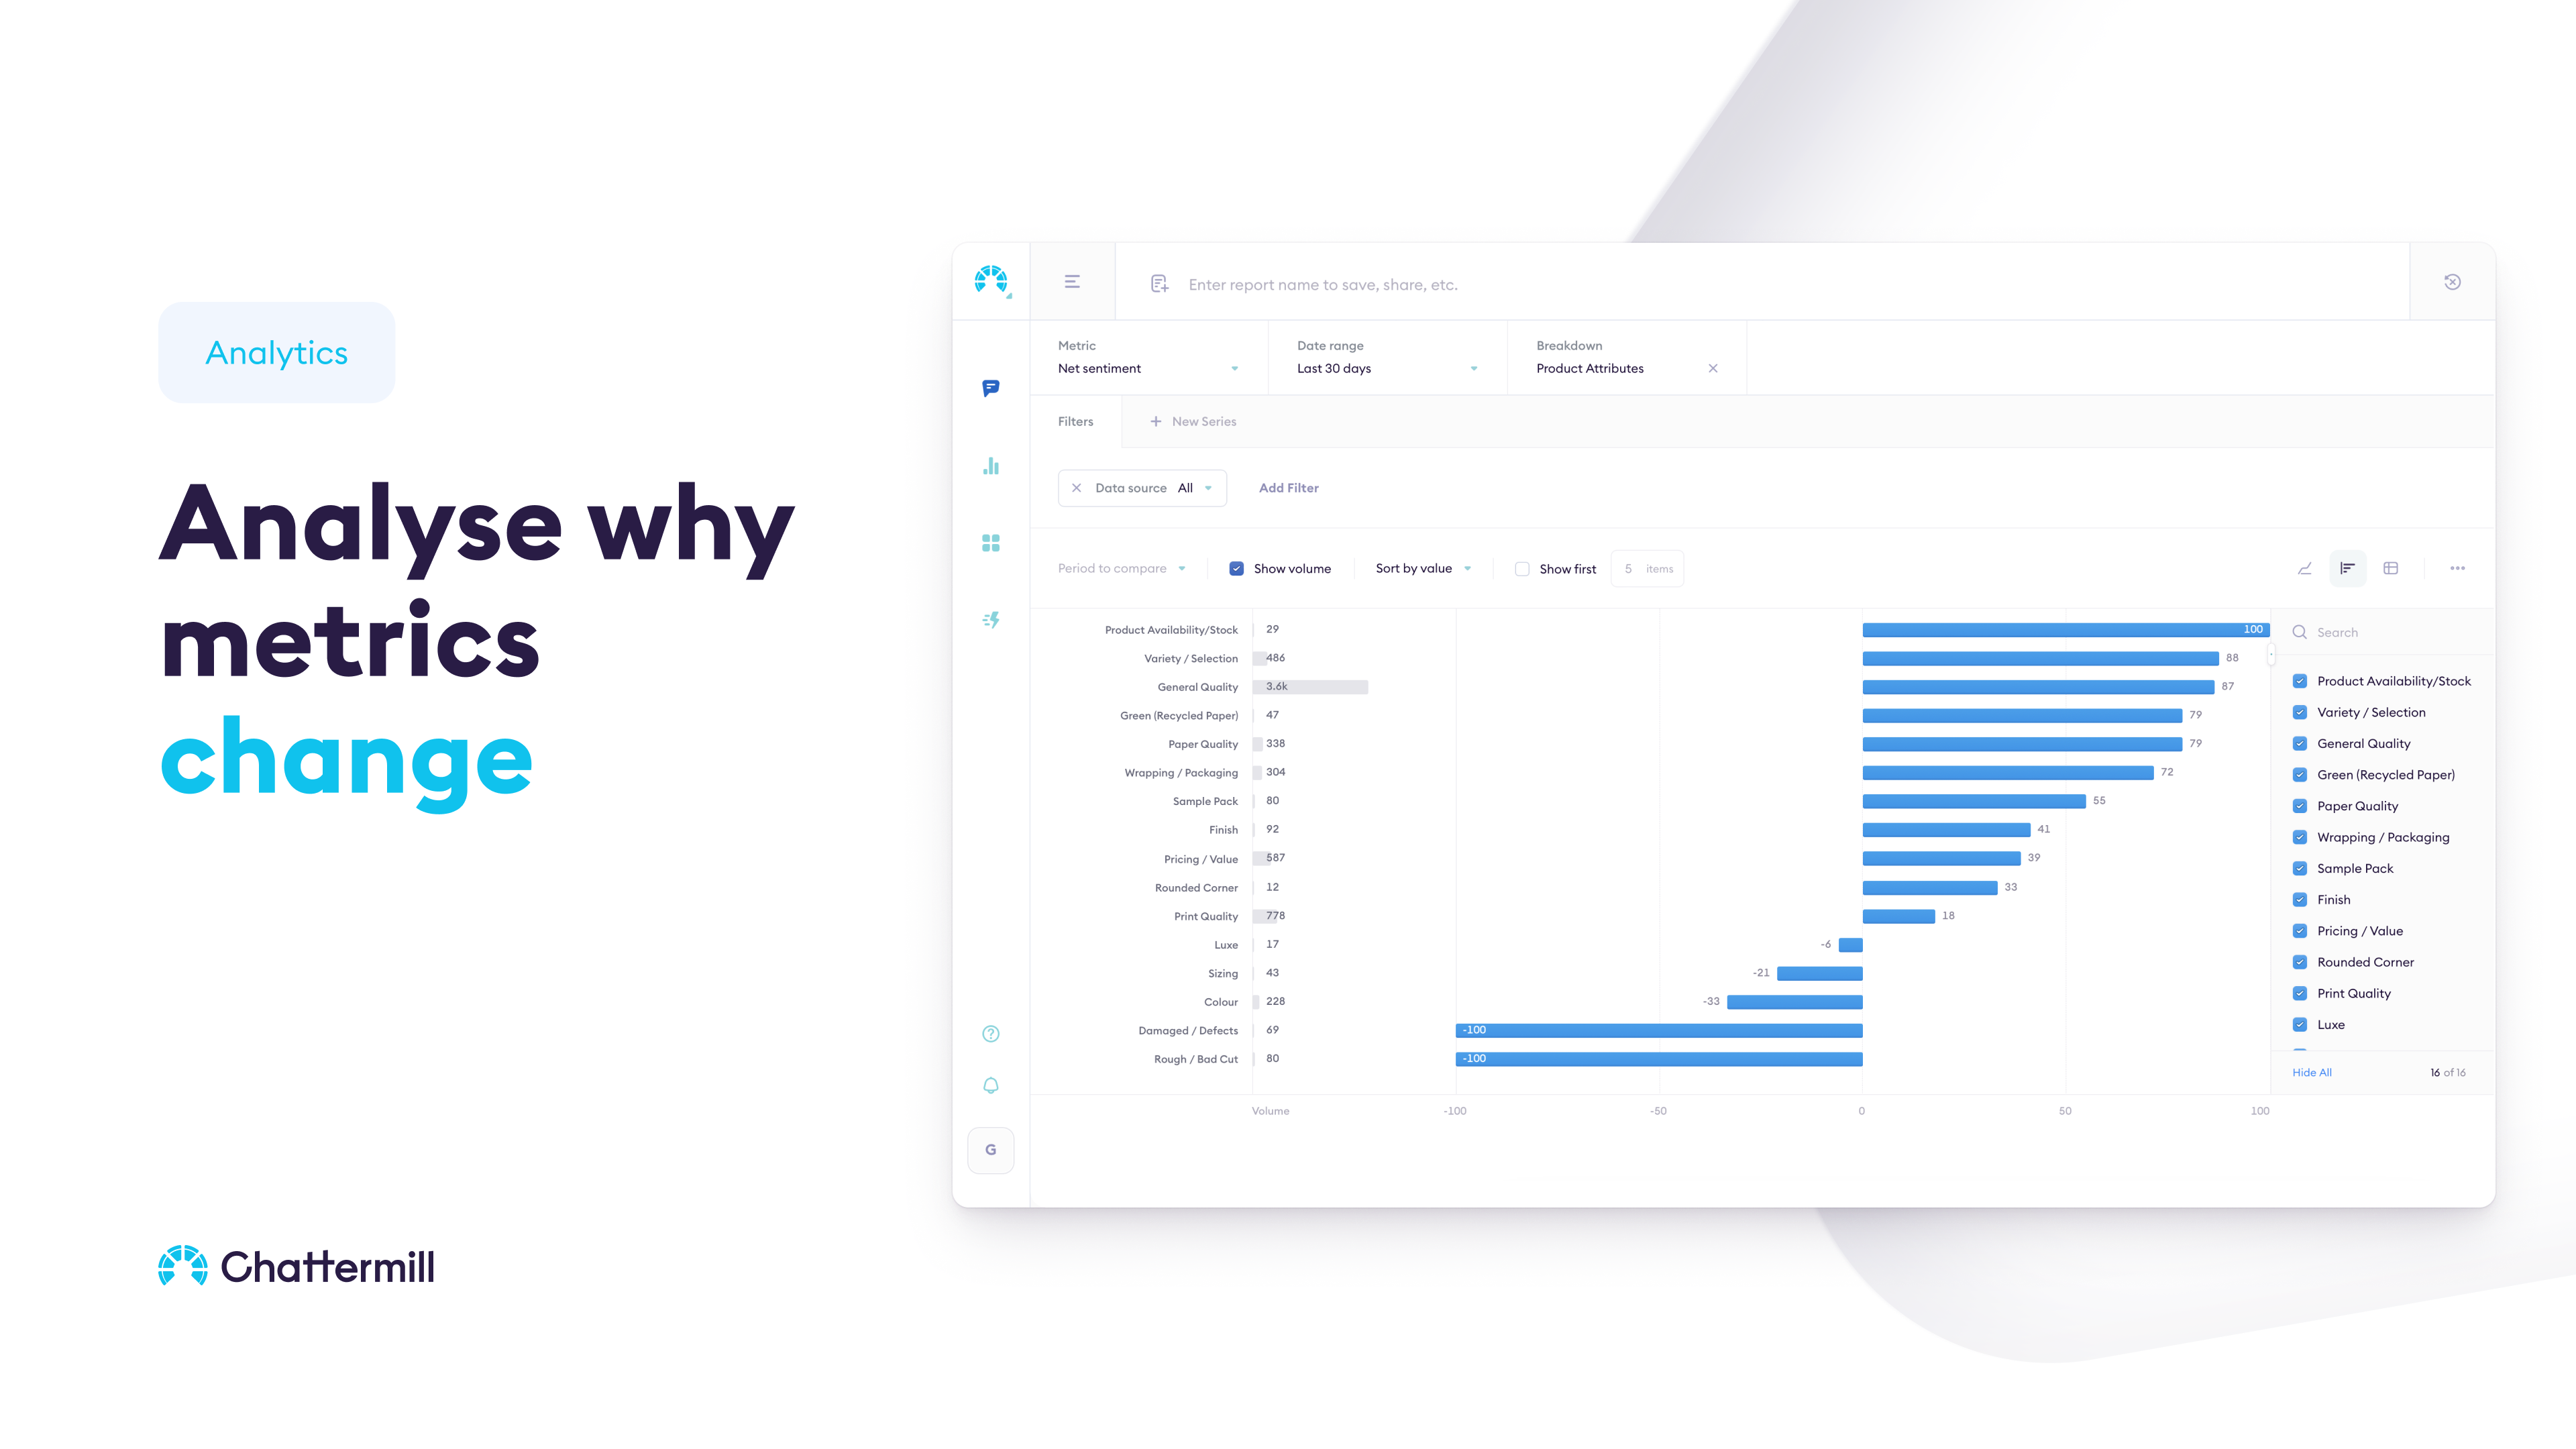 Get deep customer insights with dedicated CX metrics and various segmentation options. Understand the hidden patterns and get to the root of your problems and opportunities. It’s fast and simple for anyone.